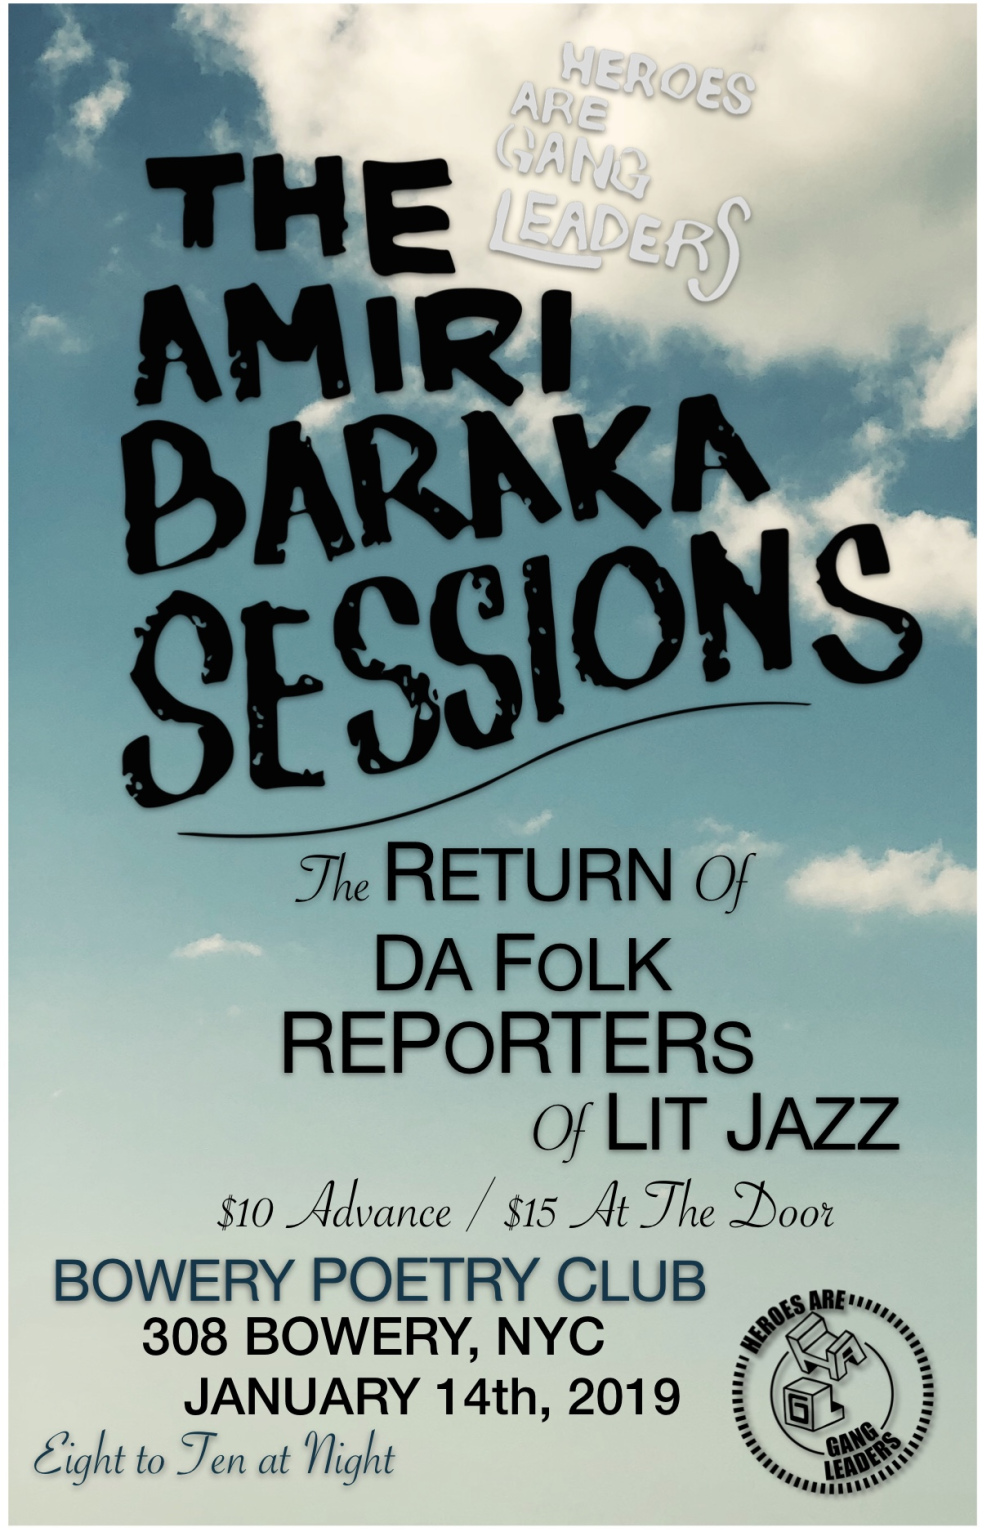 The Back Story of Heroes Are Gang Leader’s “The Amiri Baraka Sessions”